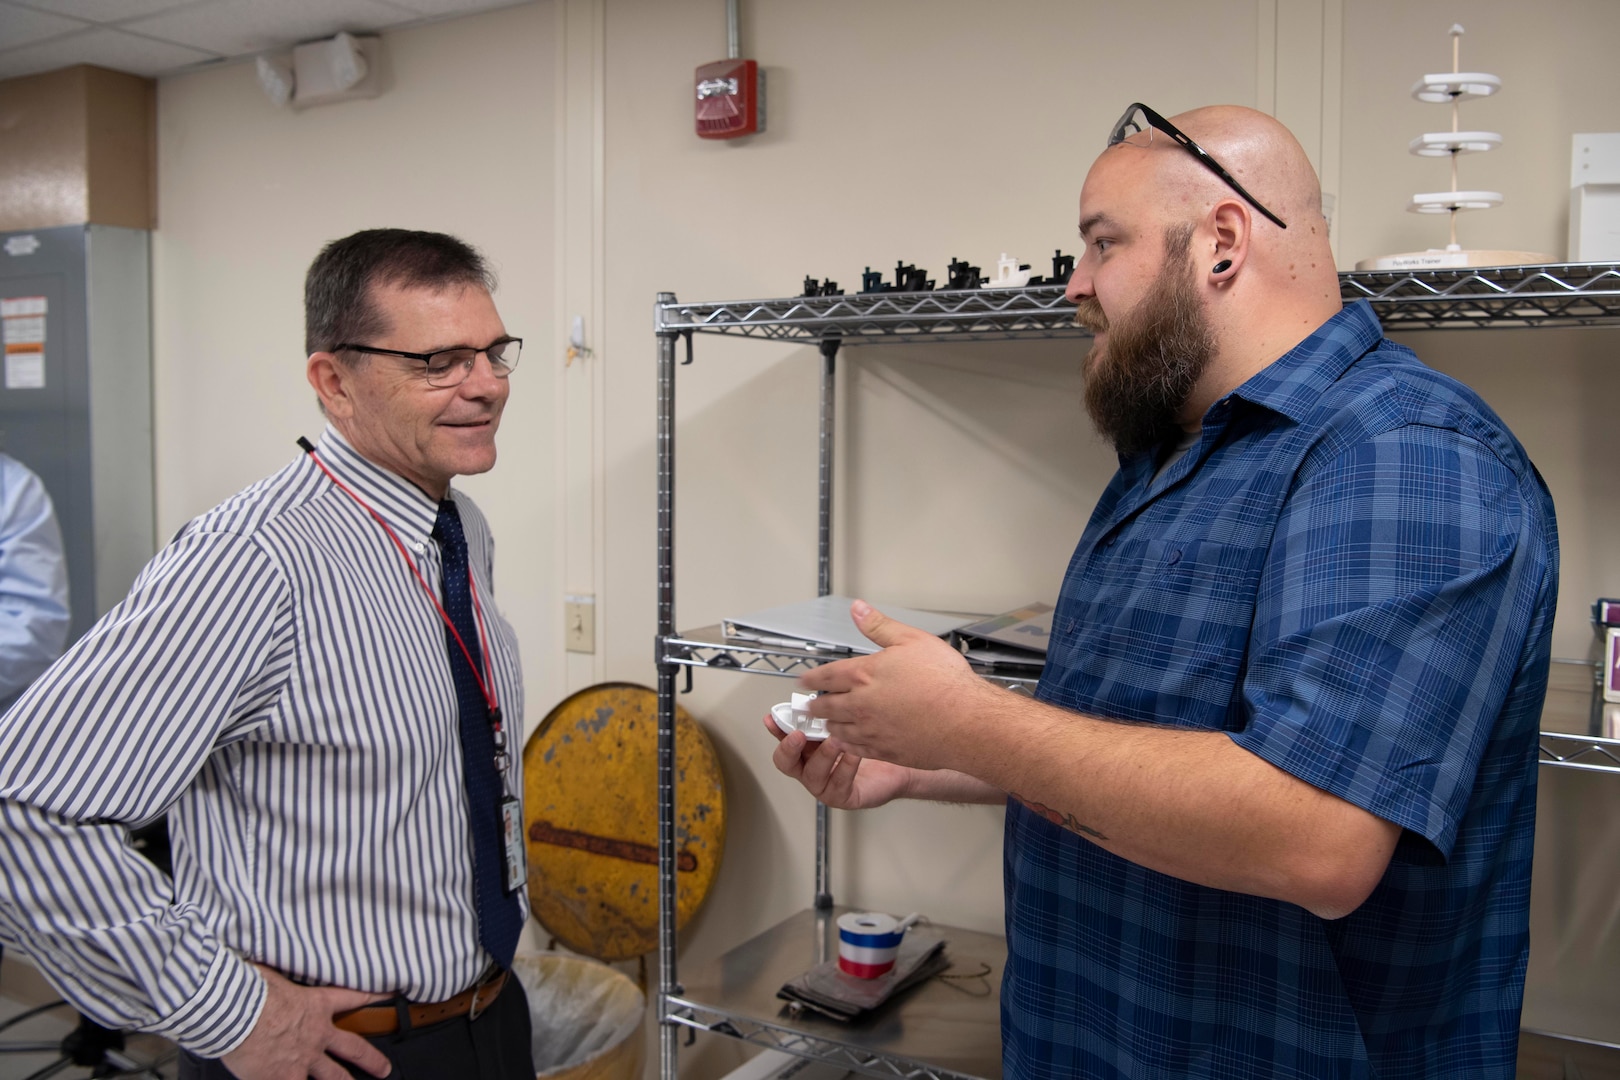 Ryan Franke (right), a technician in Carderock’s Subtractive and Additive Manufacturing Branch, explains to Steve Ouimette, Carderock’s Deputy Technical Director, what Benchy the Tug Boat is and what it is used for, during the grand opening of Carderock’s new Advanced Manufacturing Prototyping (AMP) Lab. Benchy, or Benchmark, is the 3D printed part that Franke is holding. Benchy is a quick, little test part that was created to test the limits of a 3D printer. It was designed with a few features that are known to be difficult obstacles for 3D printers. Here, Franke explains that Benchy is used in the AMP Lab training class to allow new users the opportunity to get in the Driver’s Seat and learn start to finish how to create a Build Platform for the Printers, and how to get that platform from the computer to the printer itself and how to get the print started. (U.S. Navy photo by Devin Pisner)